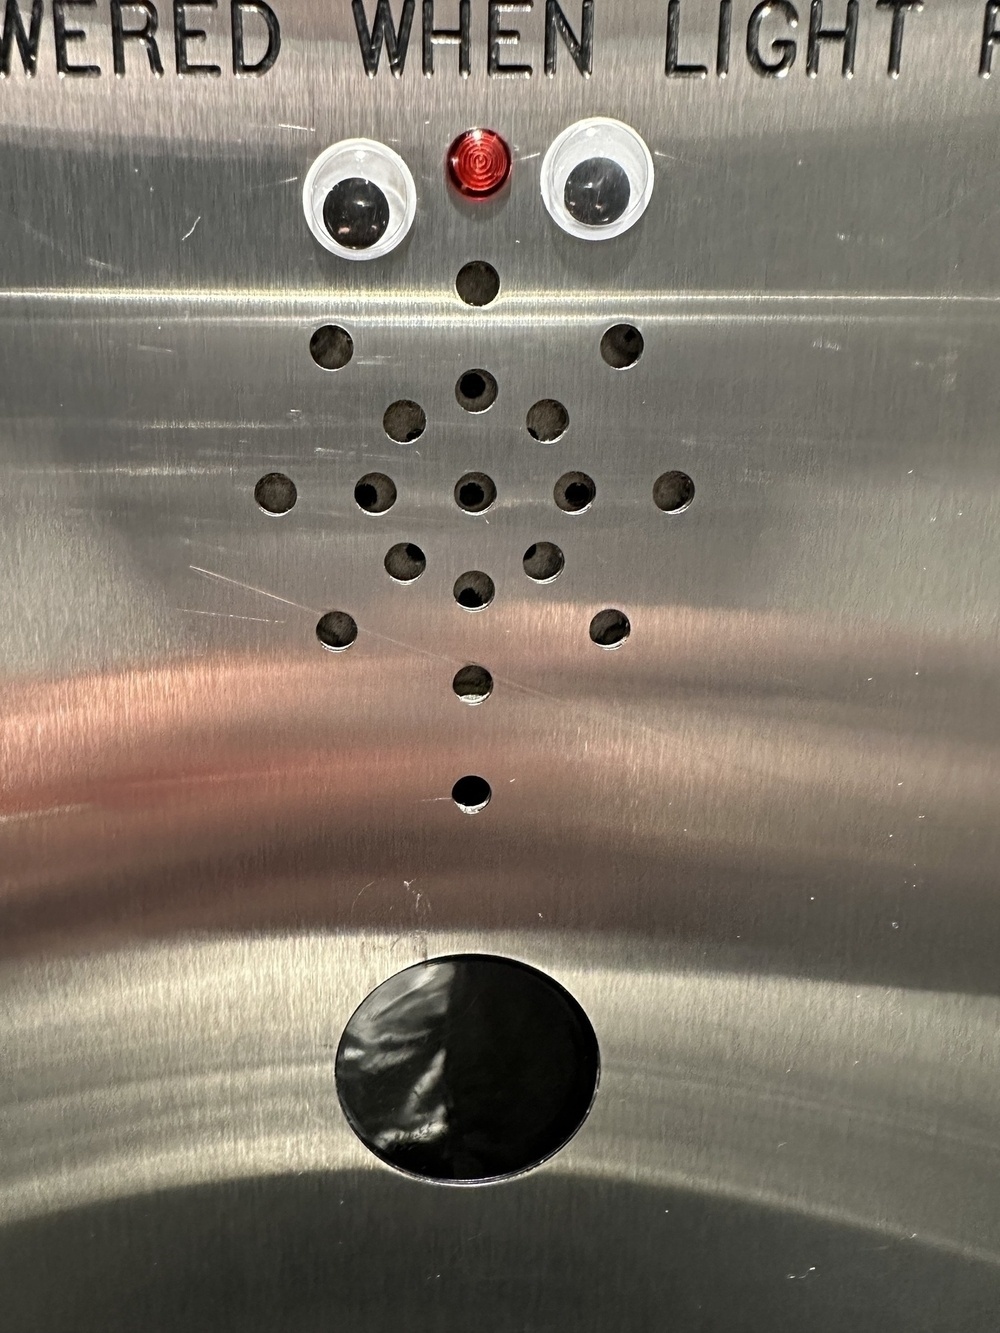 Googly eyes added to an elevator.